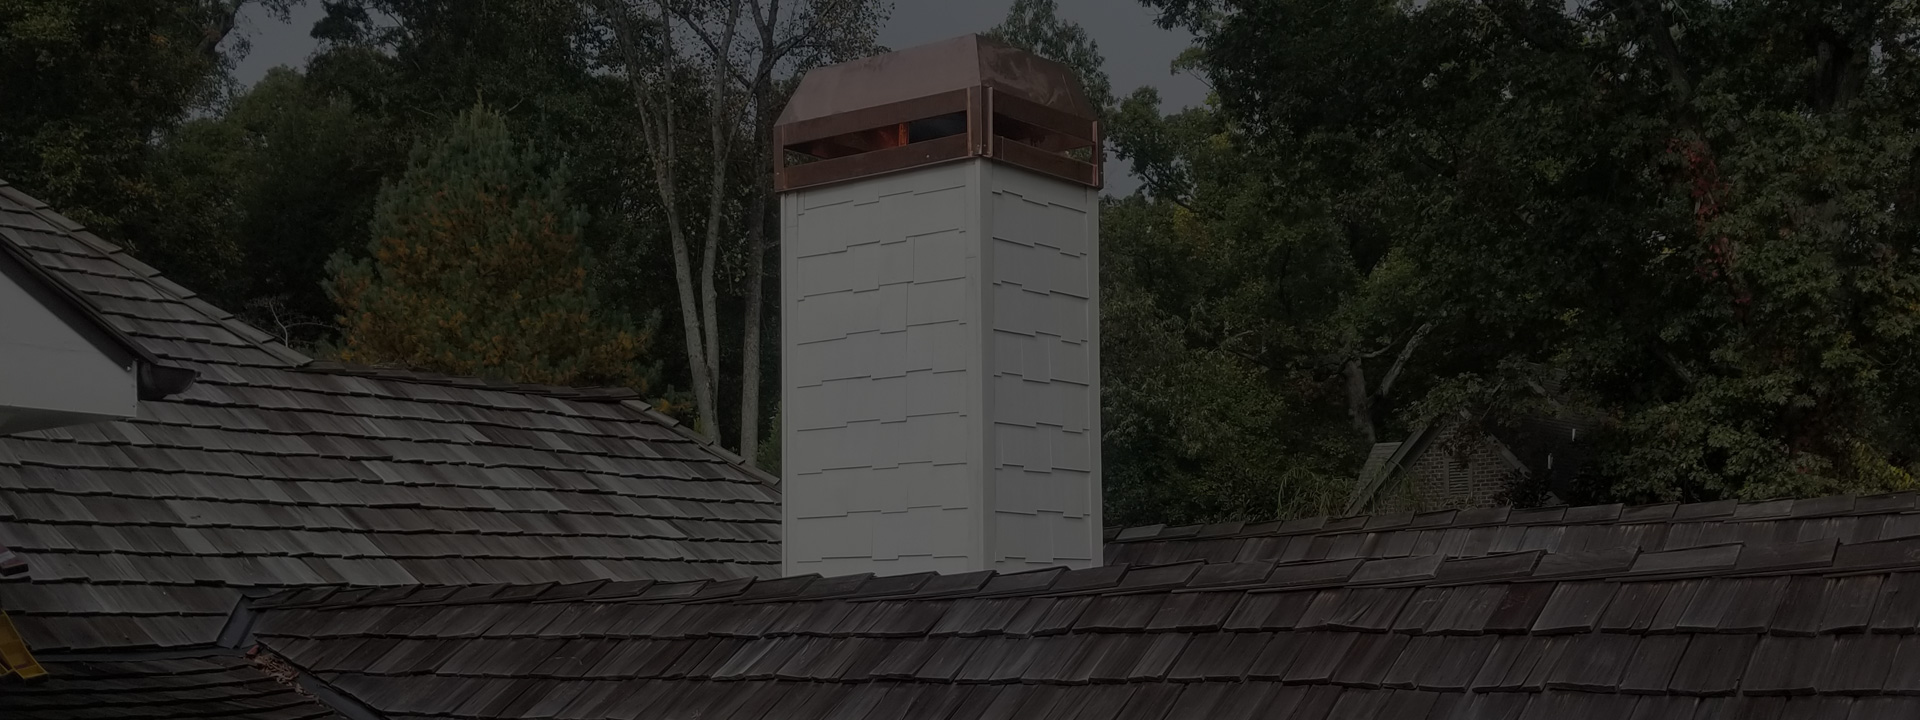 A chimney on the roof of a house.